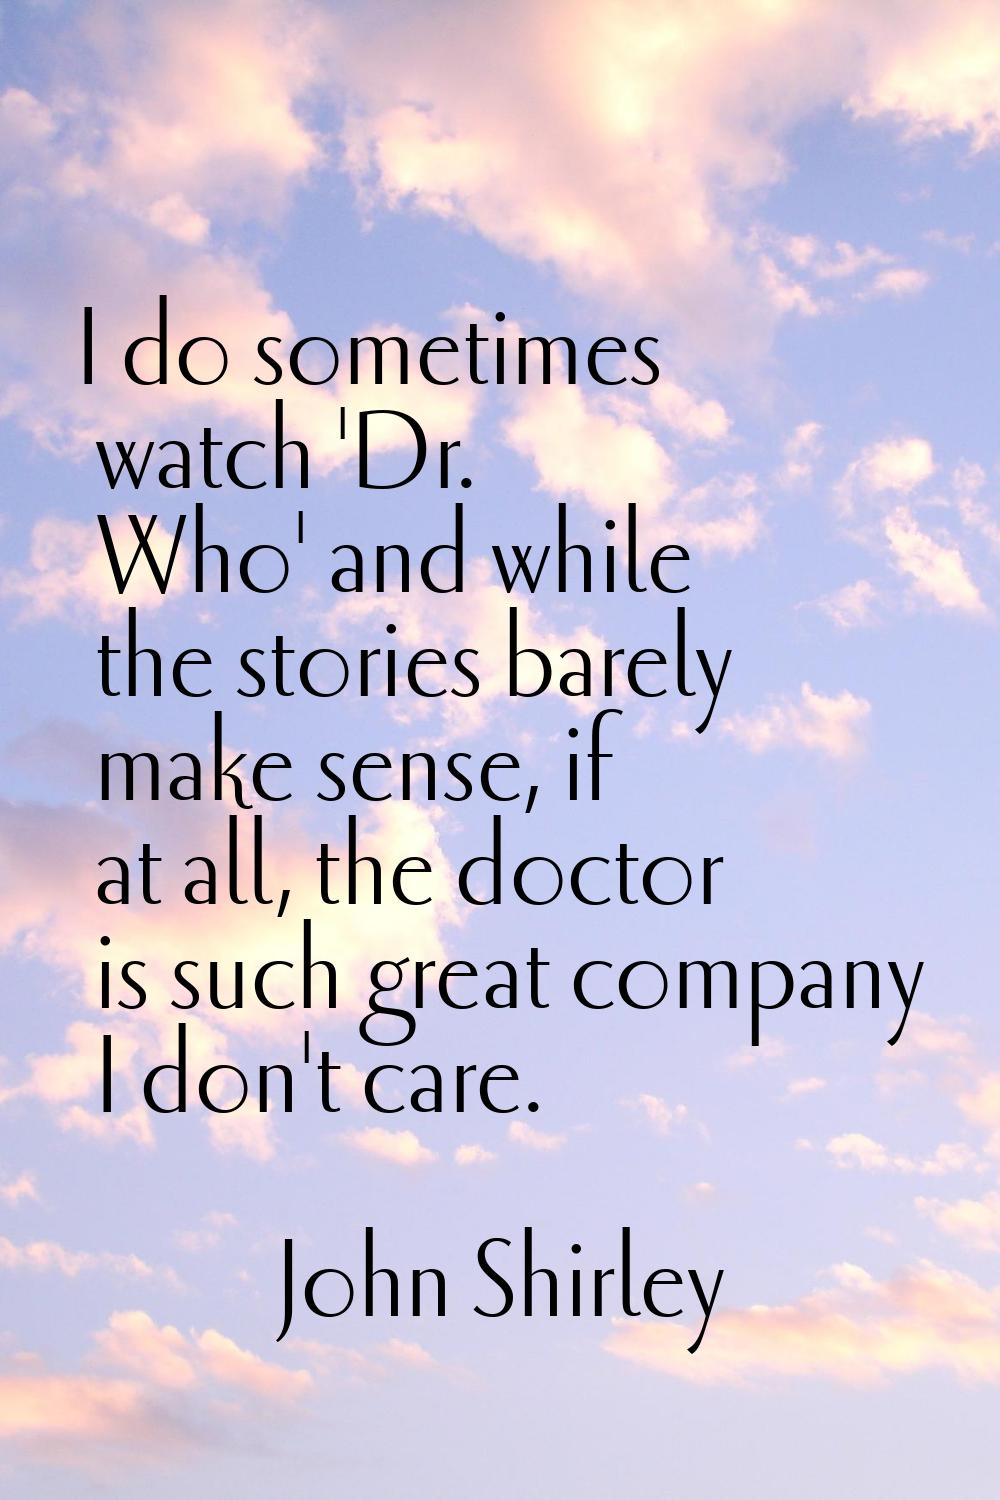 I do sometimes watch 'Dr. Who' and while the stories barely make sense, if at all, the doctor is su